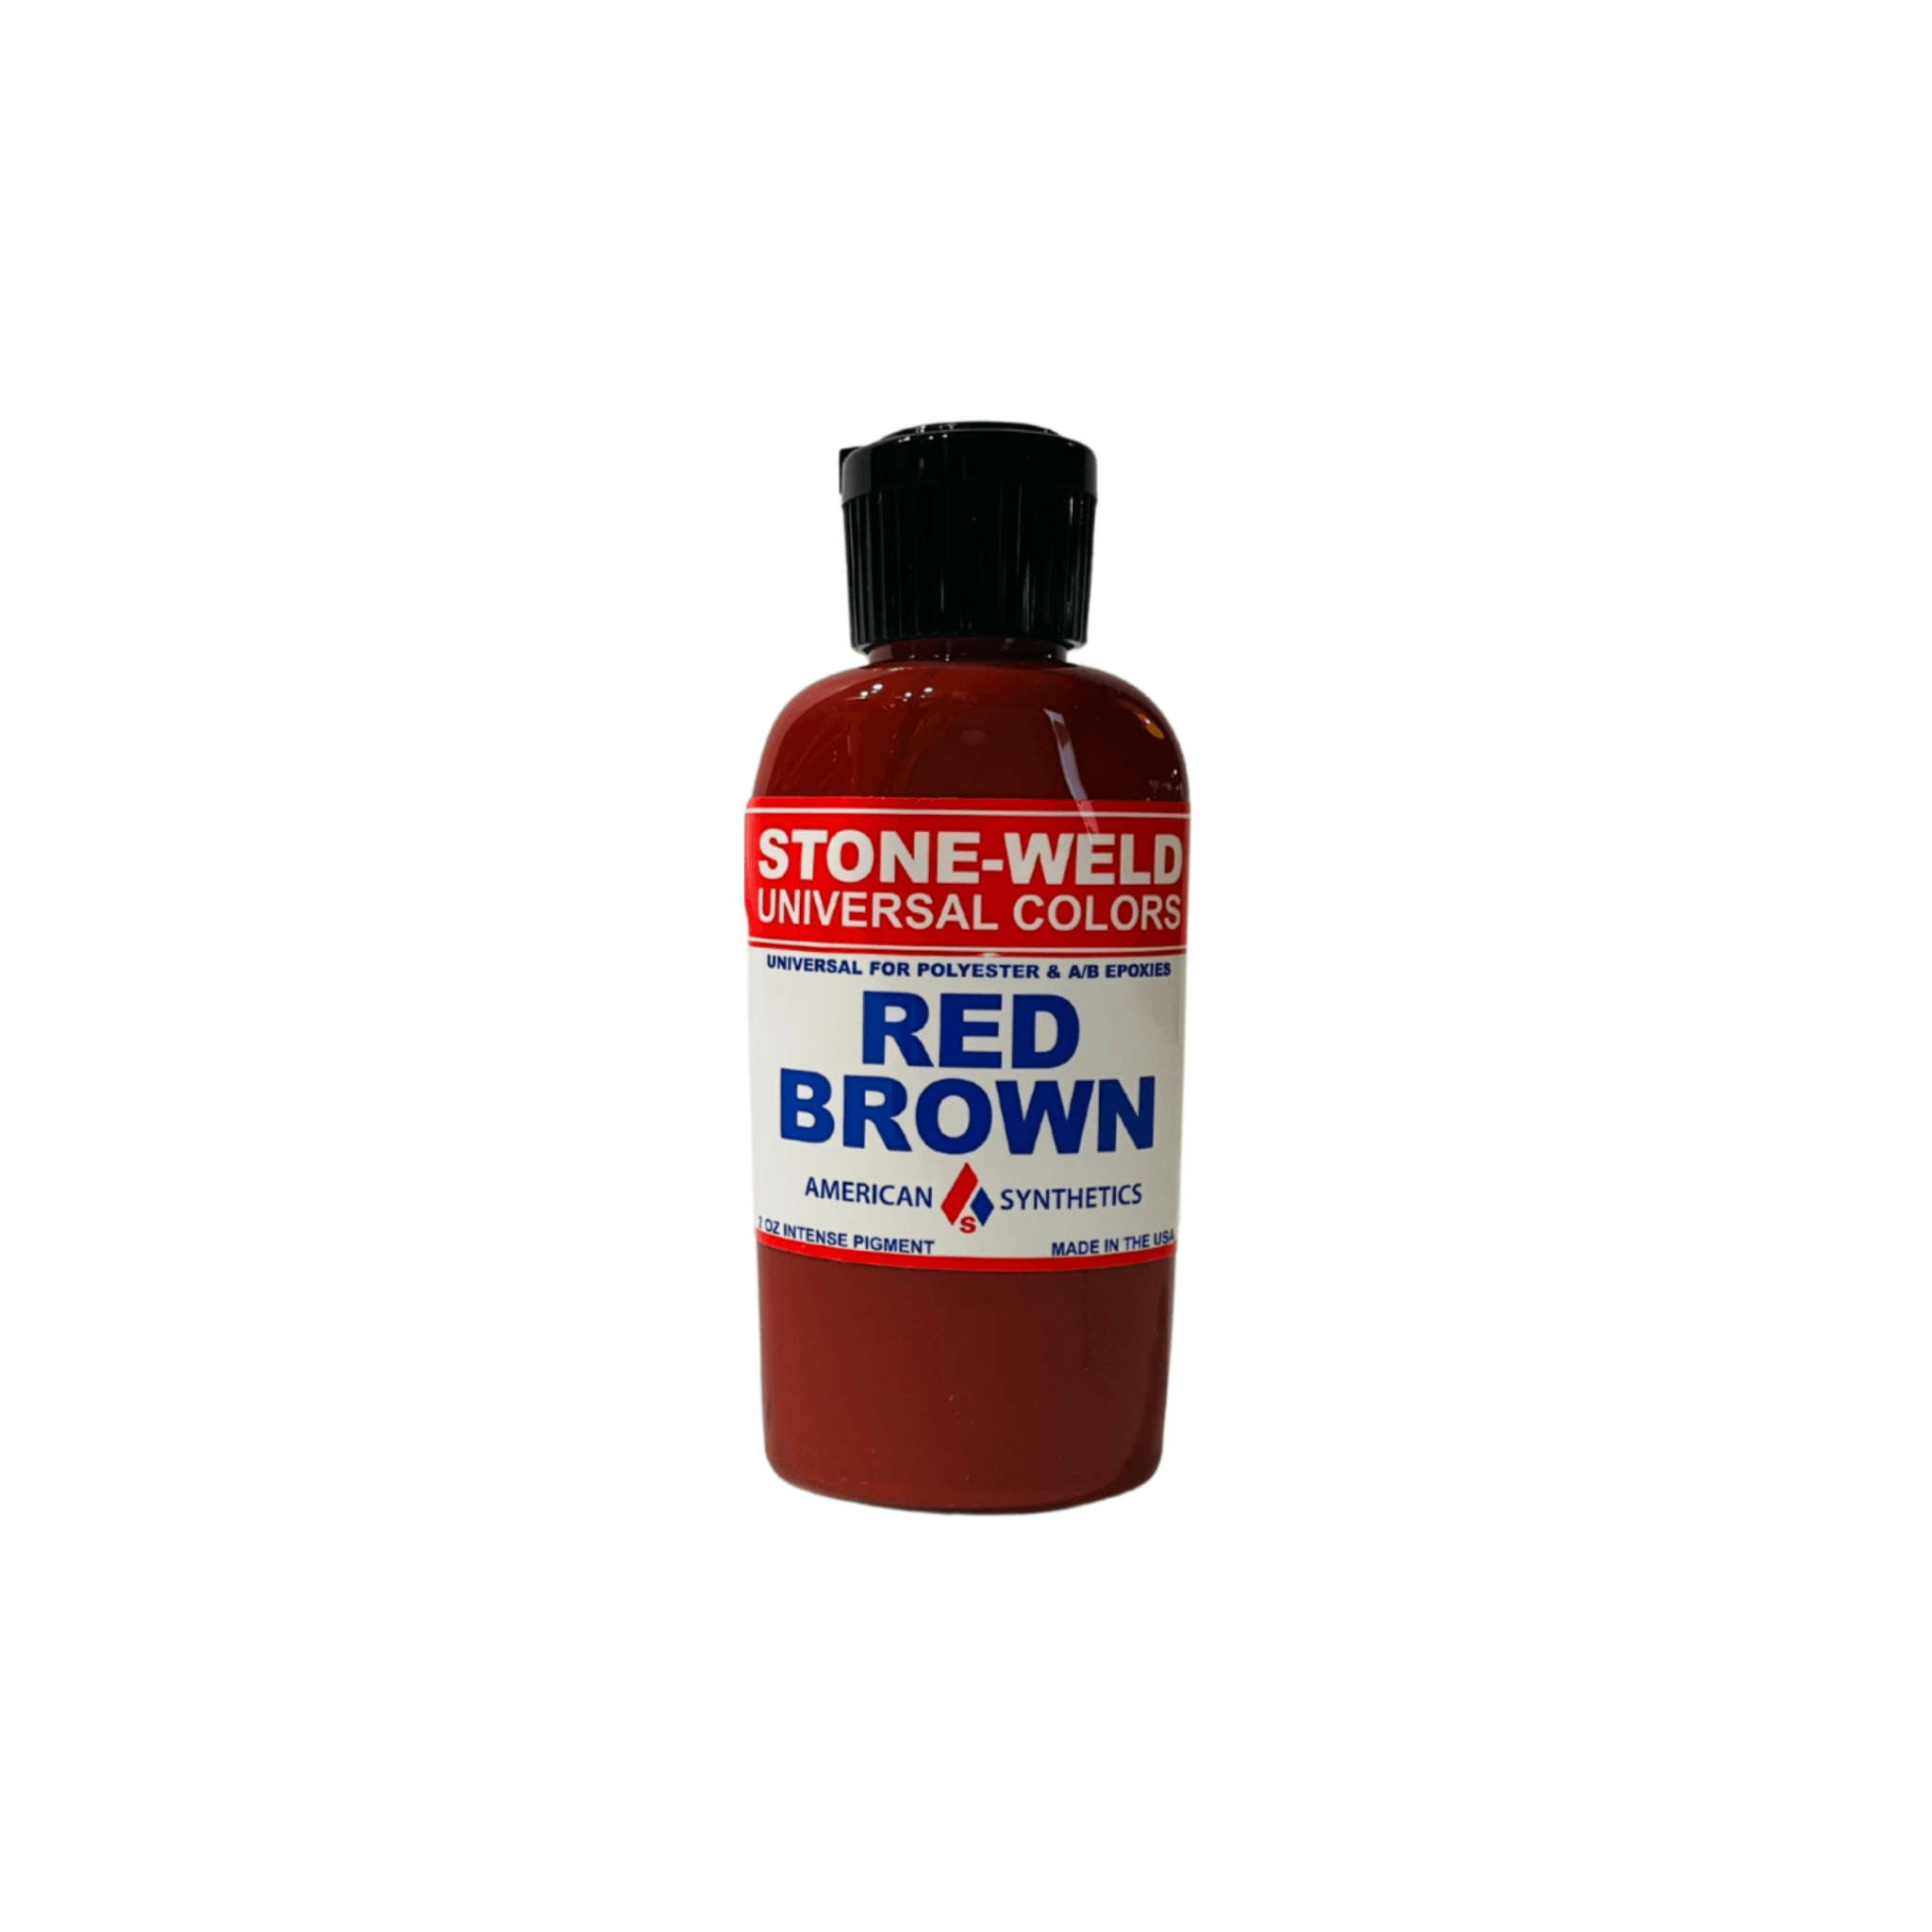 Stone-Weld 2 oz. Universal Color, Red-Brown - Direct Stone Tool Supply, Inc